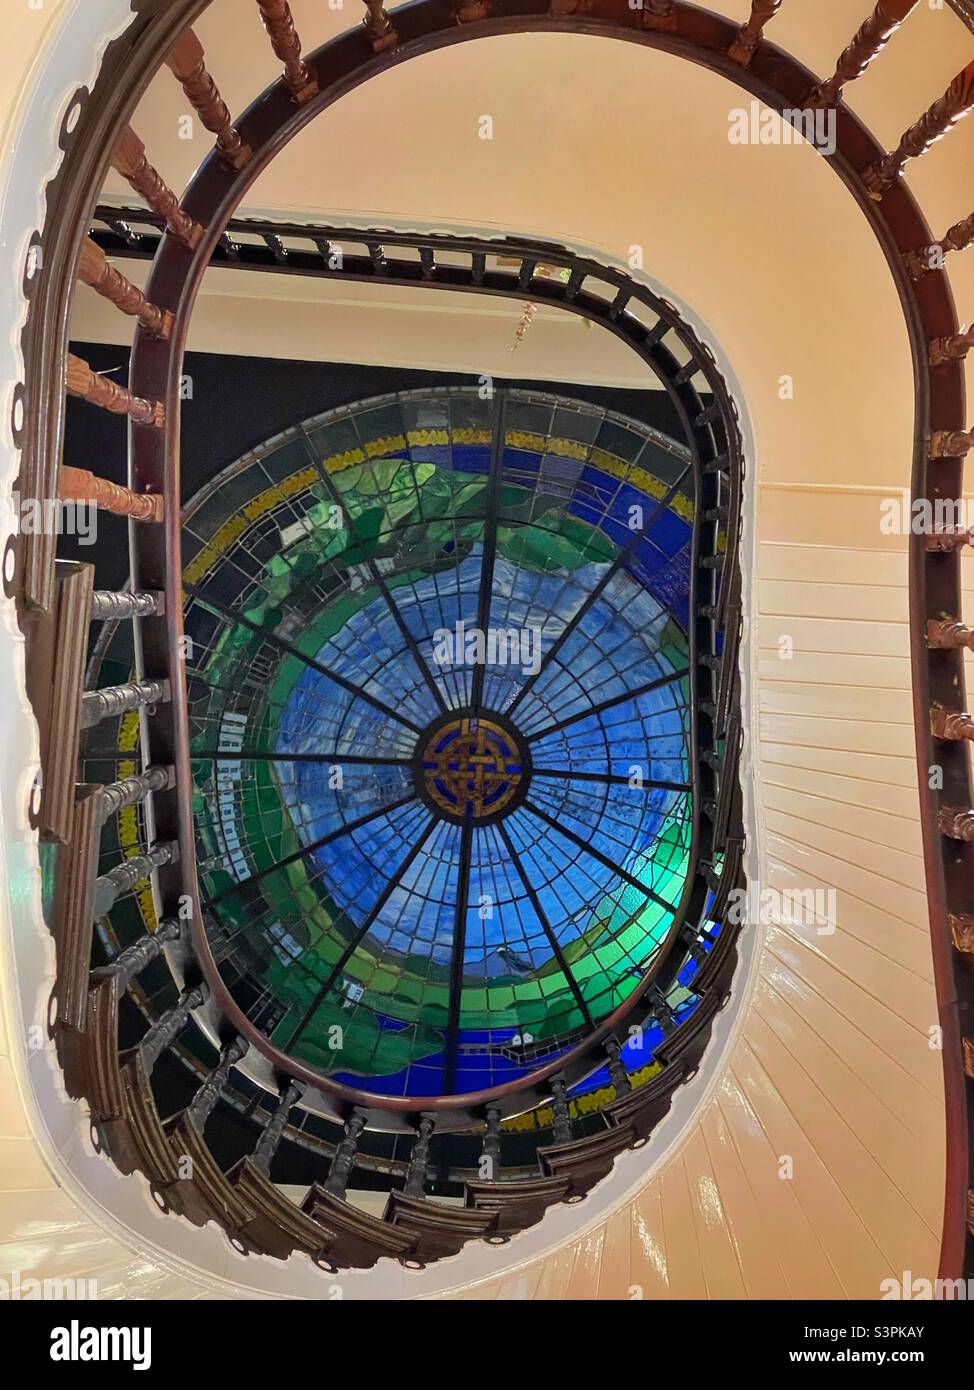 Spiral staircase leading up to a stained glass ceiling in the Portmeirion shop, Porthmadog, North Wales. Stock Photo